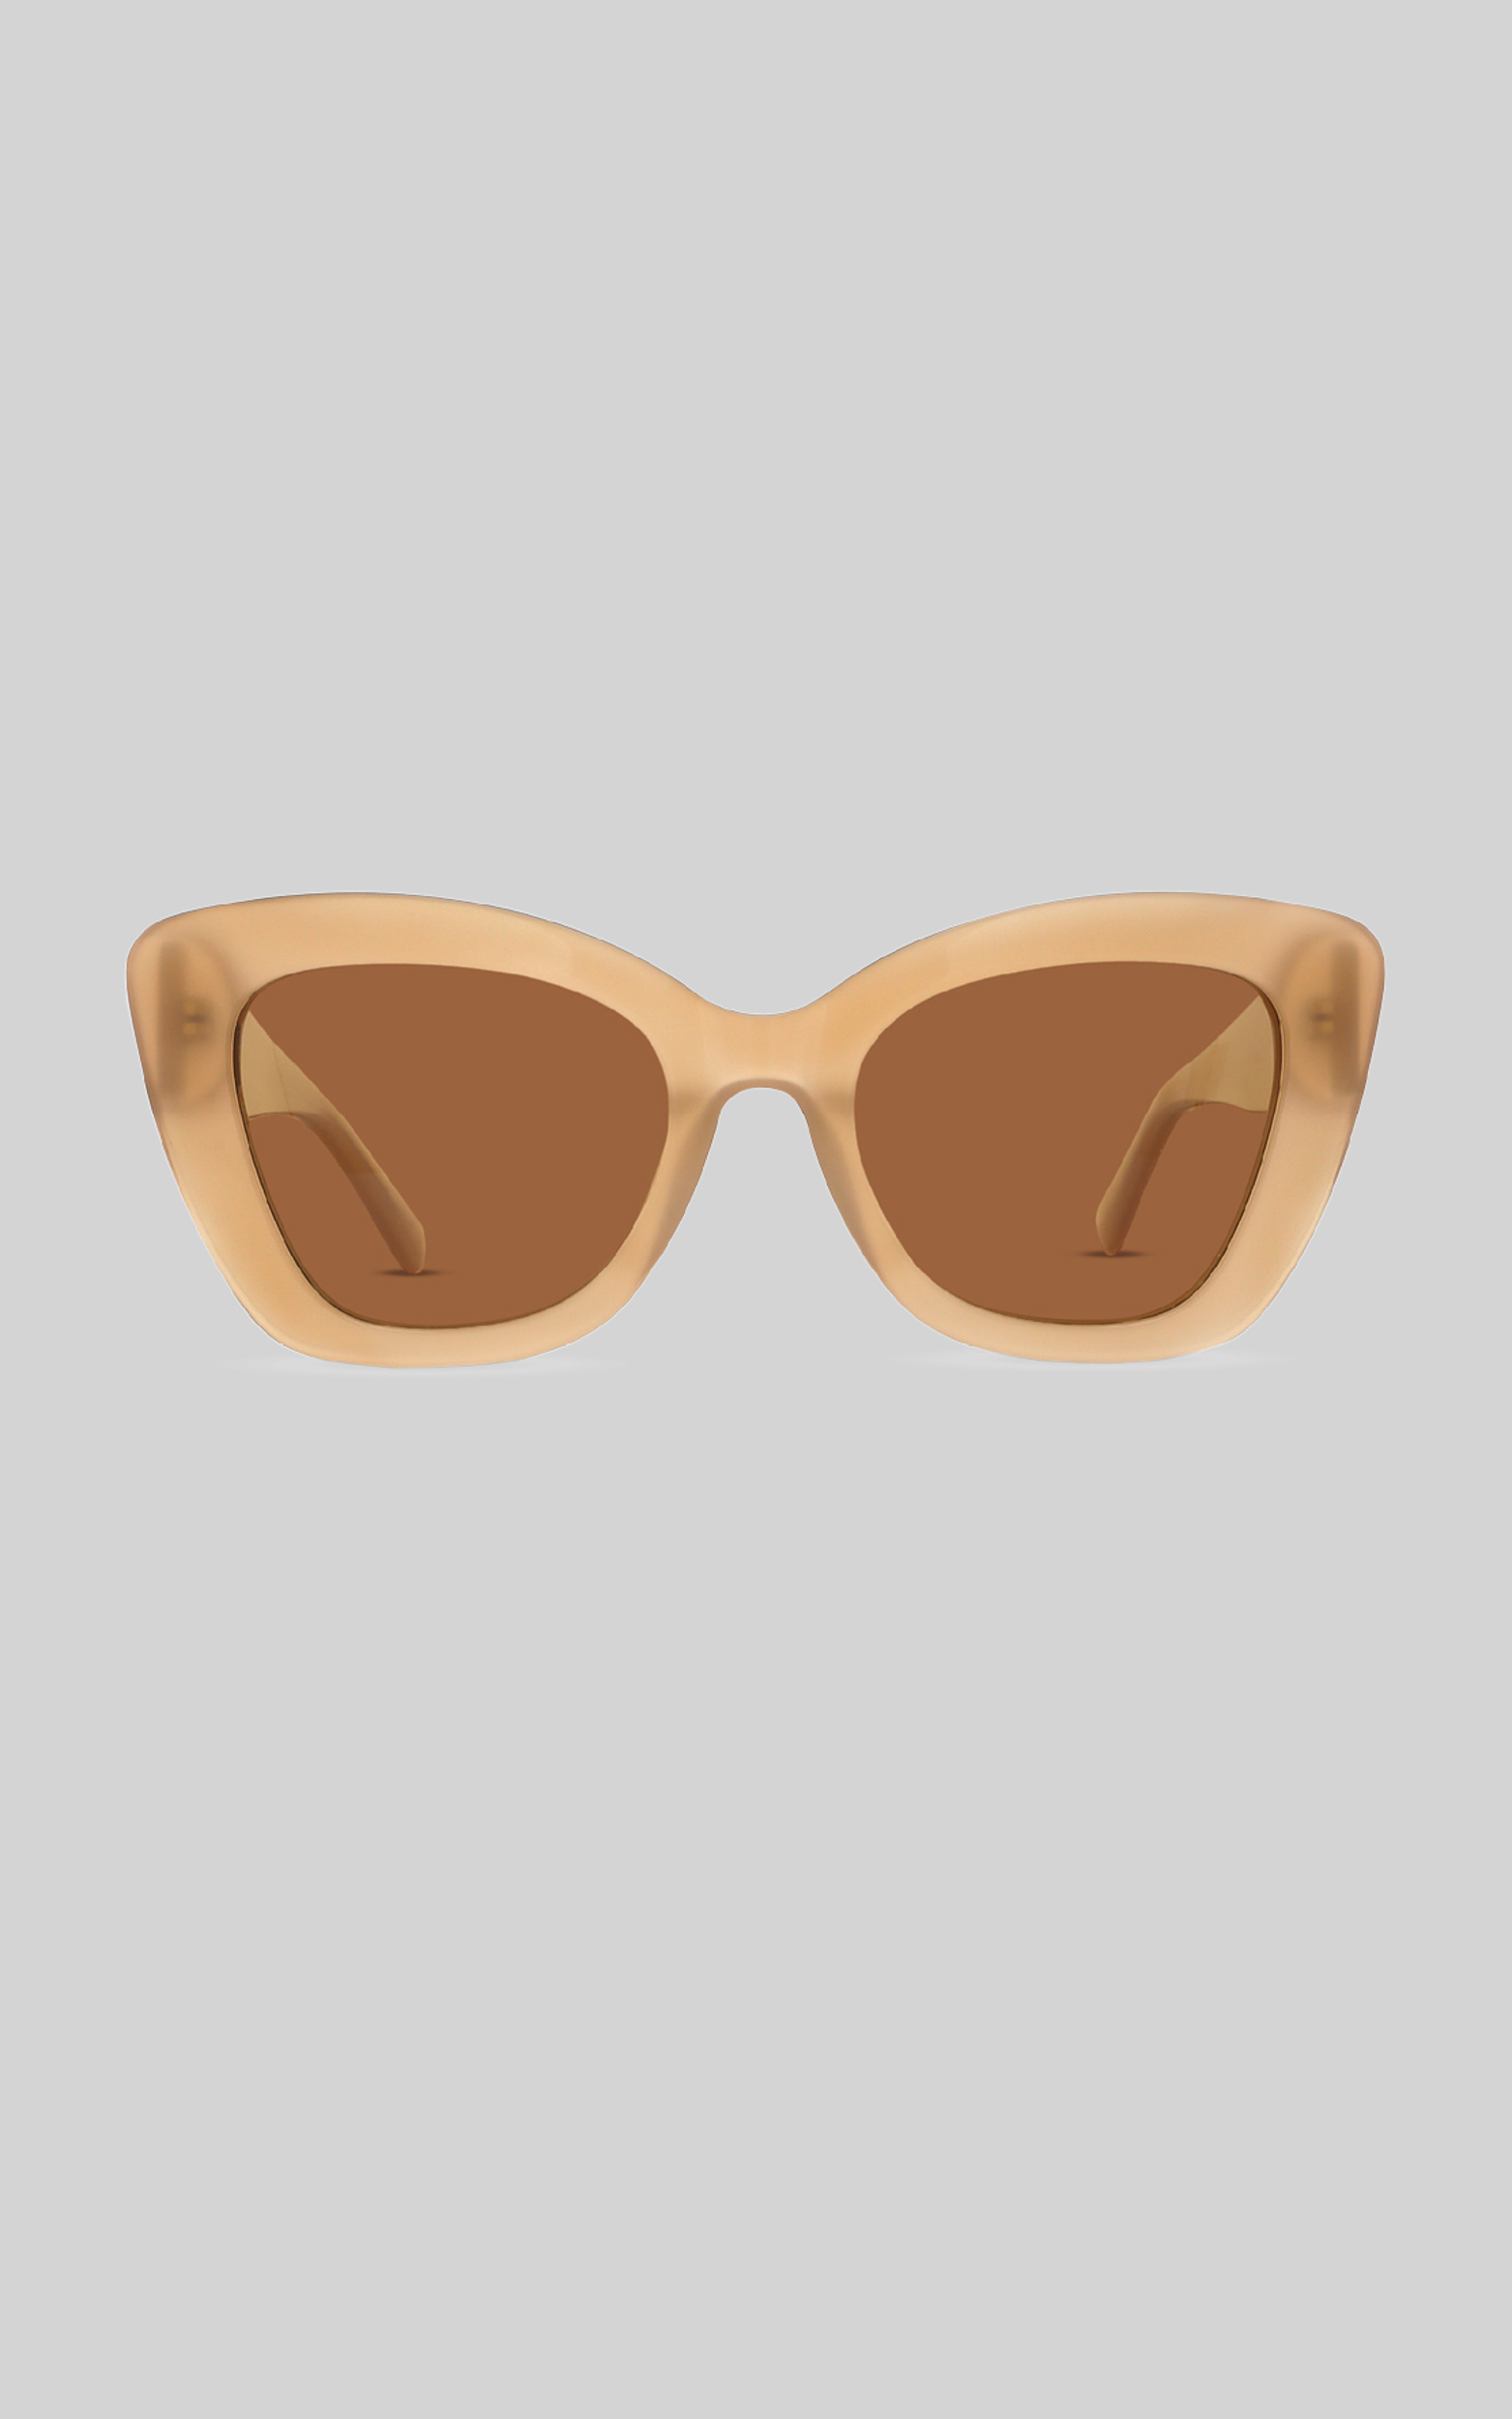 BANBE EYEWEAR - THE BARDOT in NUDE-Brown - NoSize, BRN2, hi-res image number null